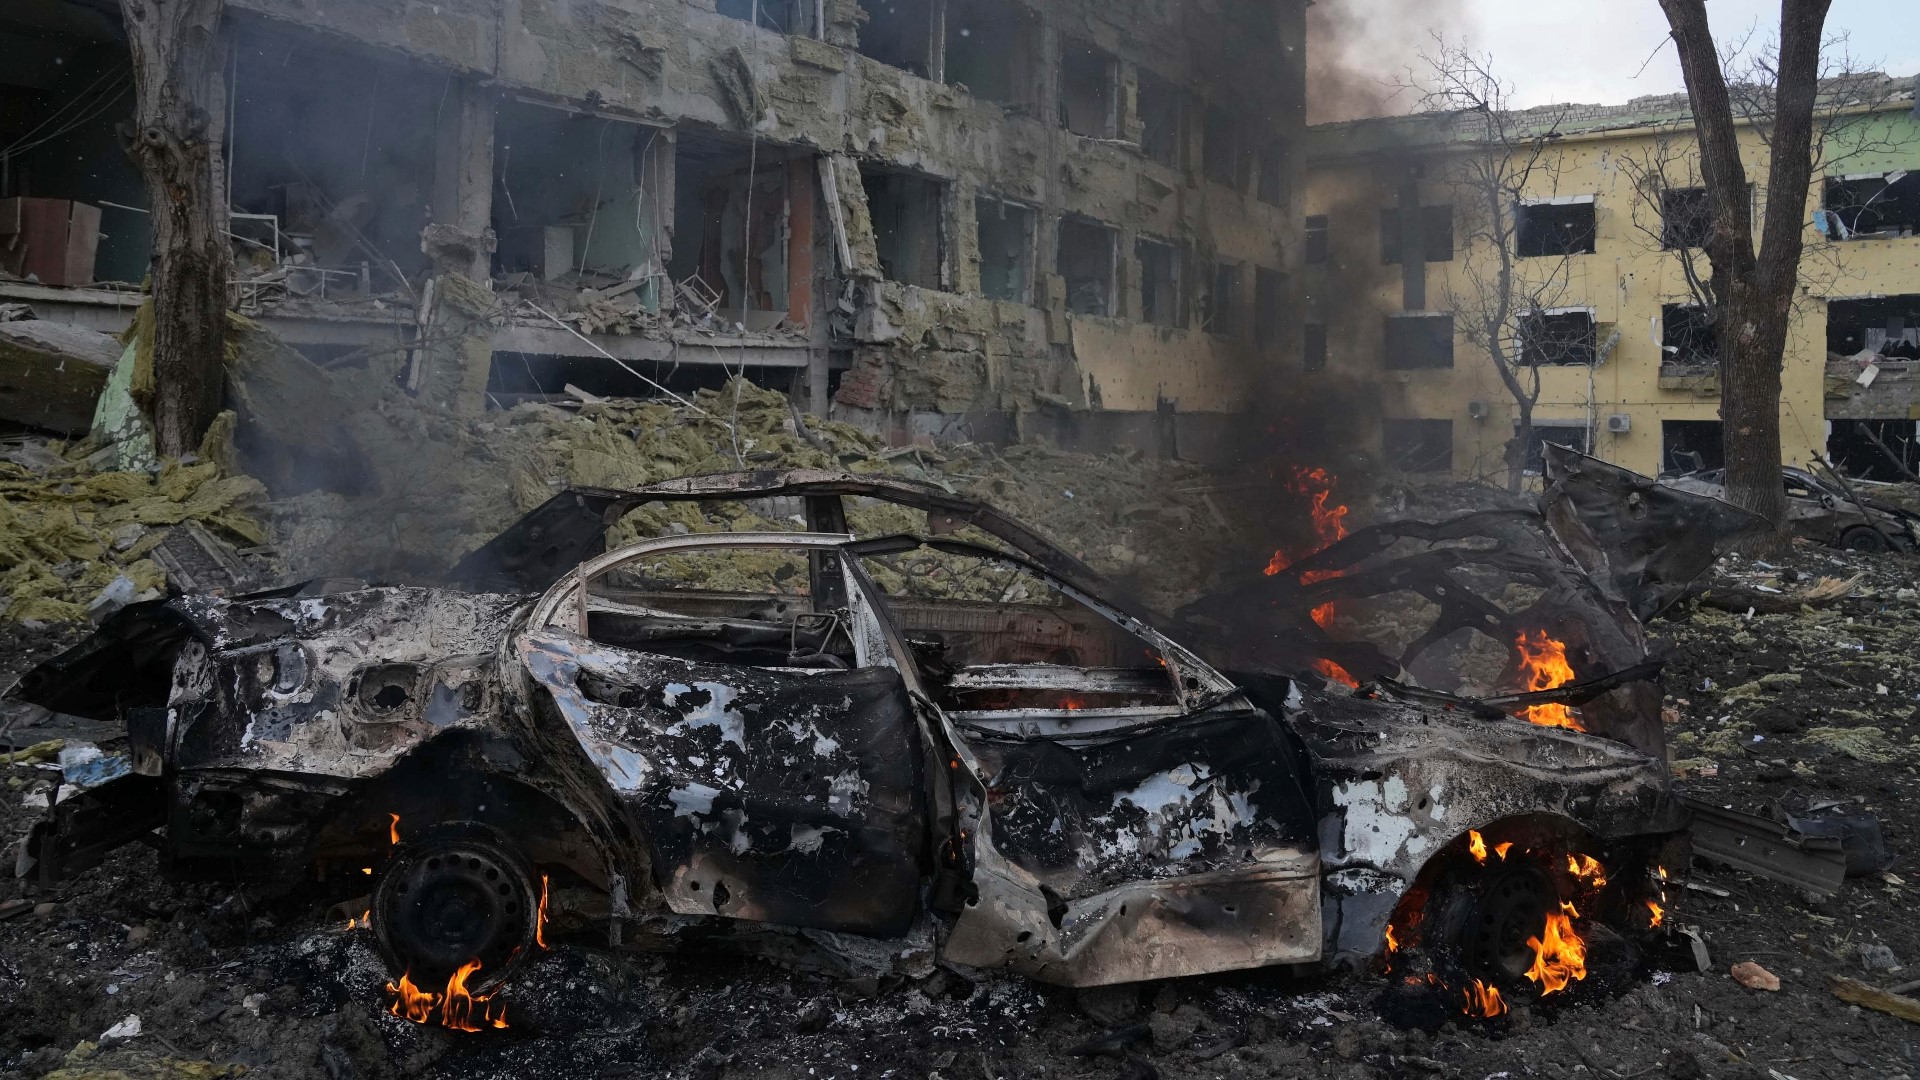 The World Health Organization said it had confirmed 10 deaths in attacks on health facilities and ambulances since the war in Ukraine began.